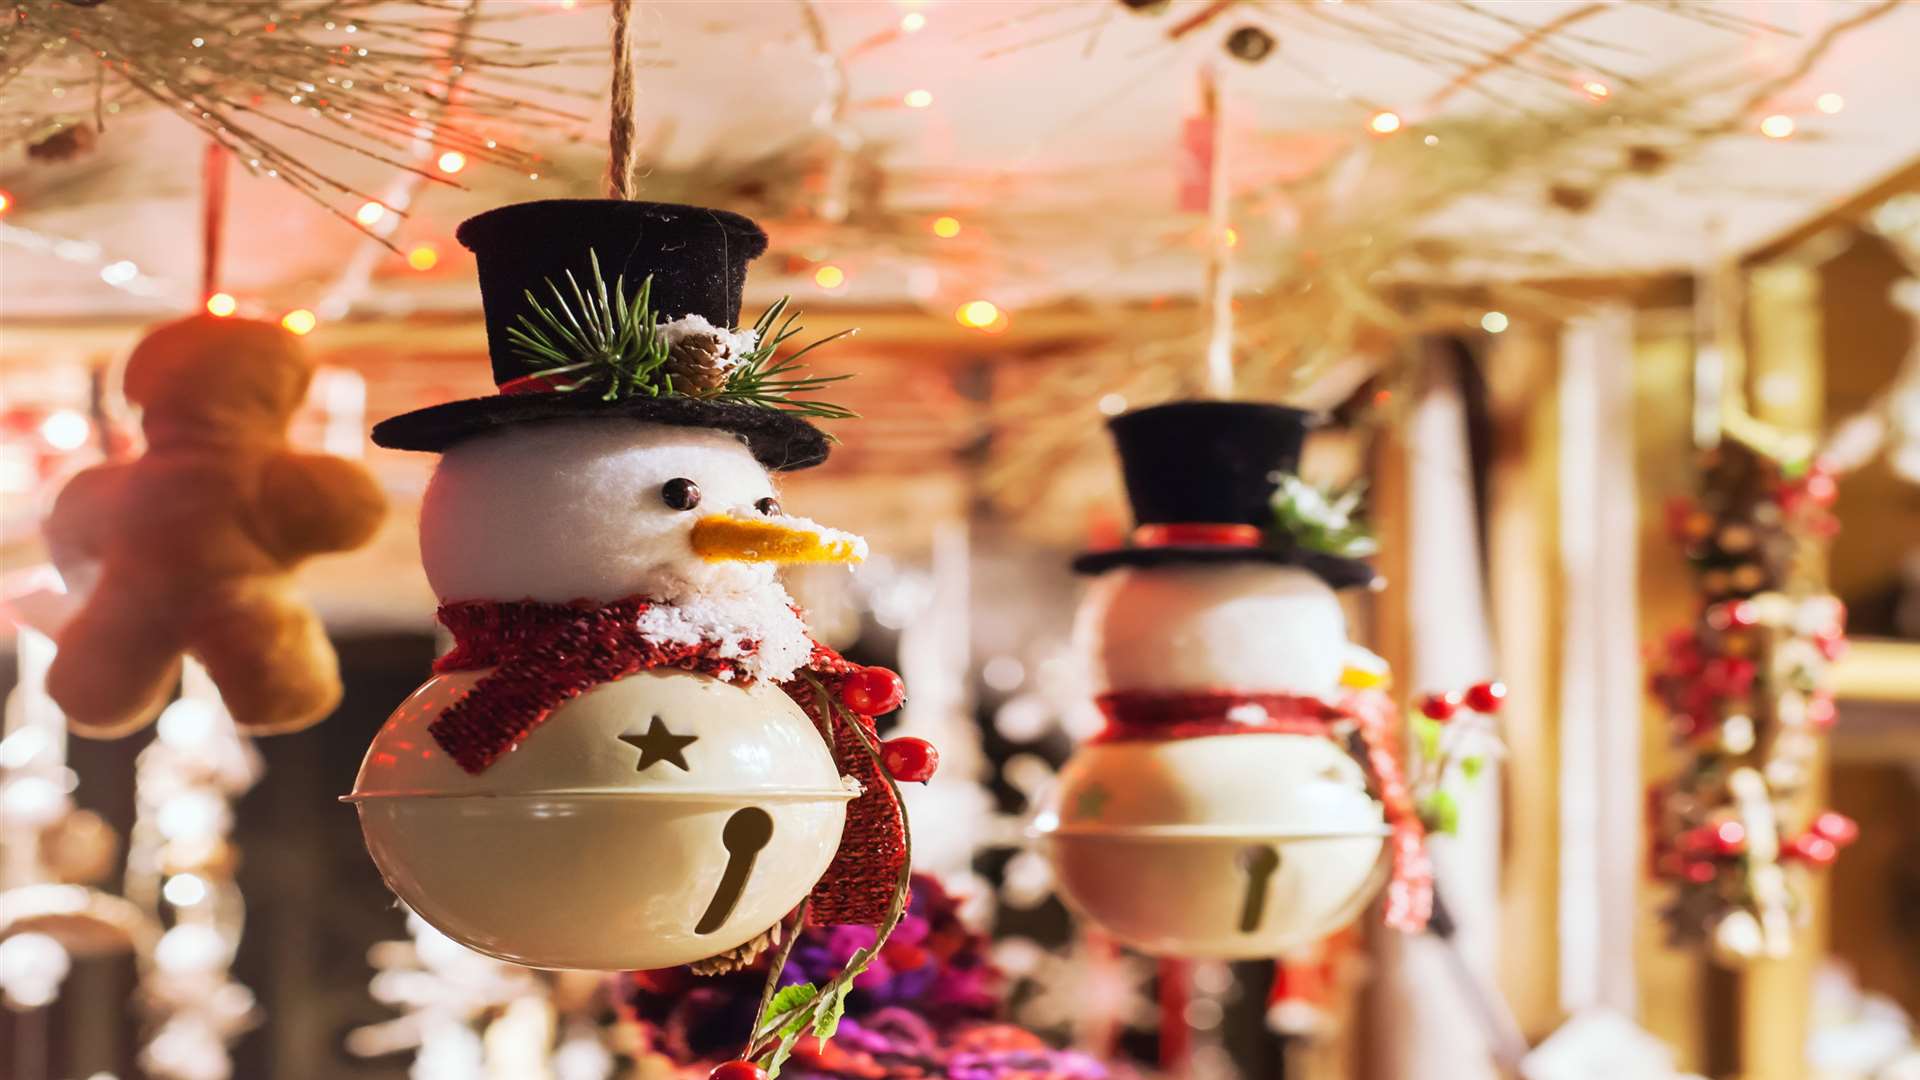 Wherever you are in northern France this month, there's a Christmas market waiting to be discovered